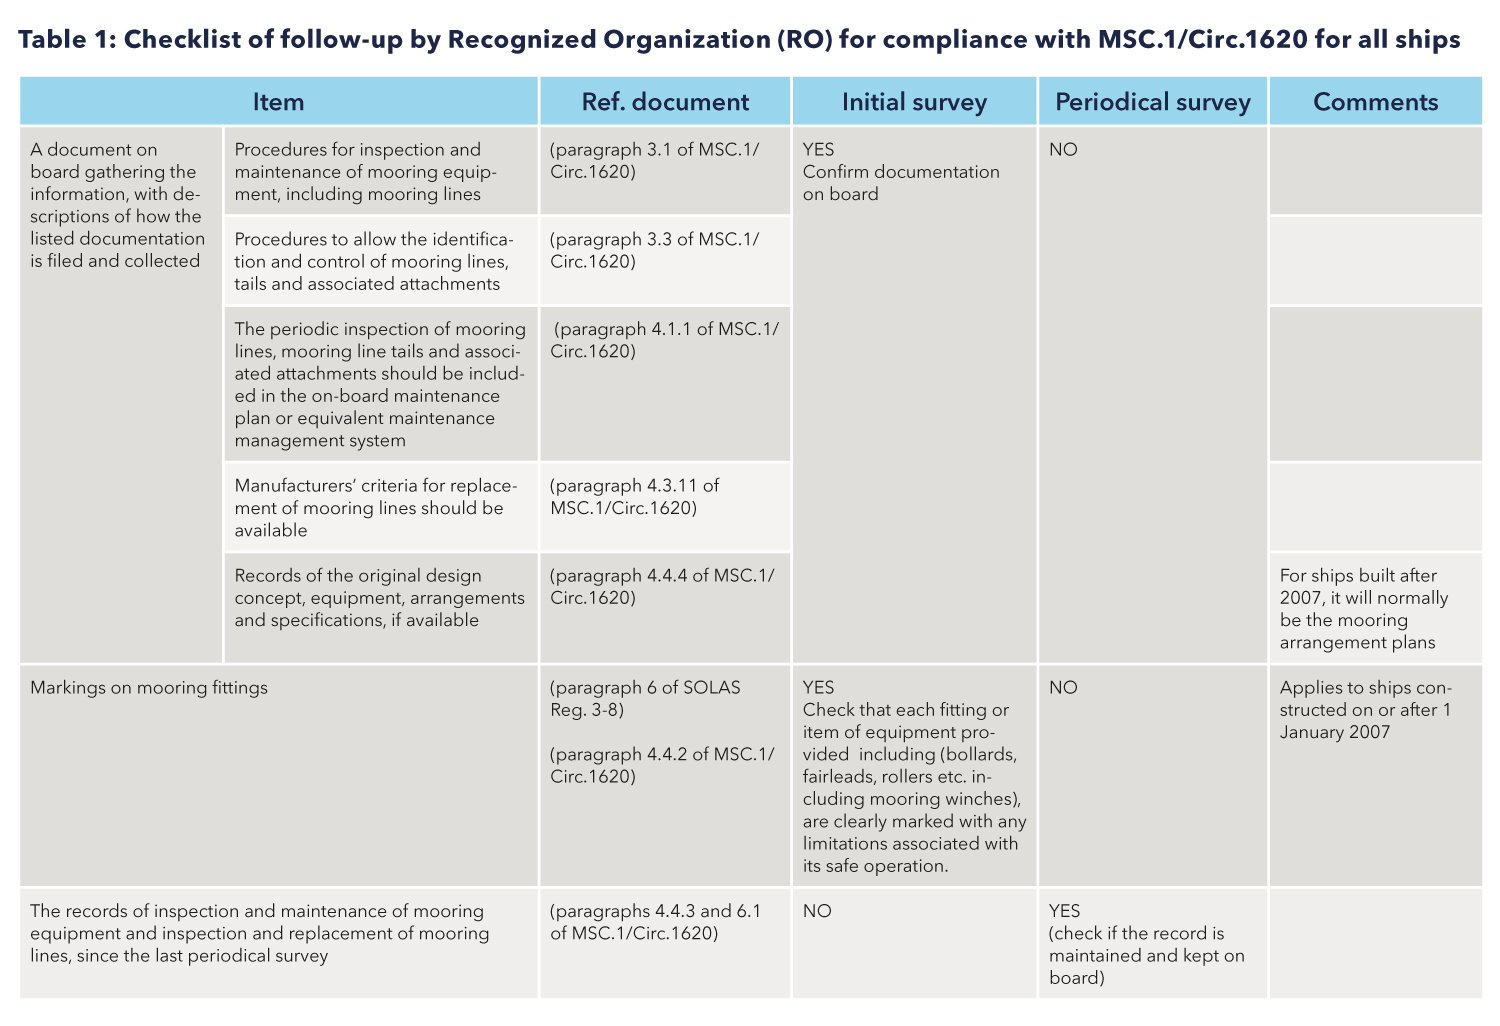 Table 1: Checklist of follow-up by Recognized Organization (RO) for compliance with MSC.1/Circ.1620 for all ships